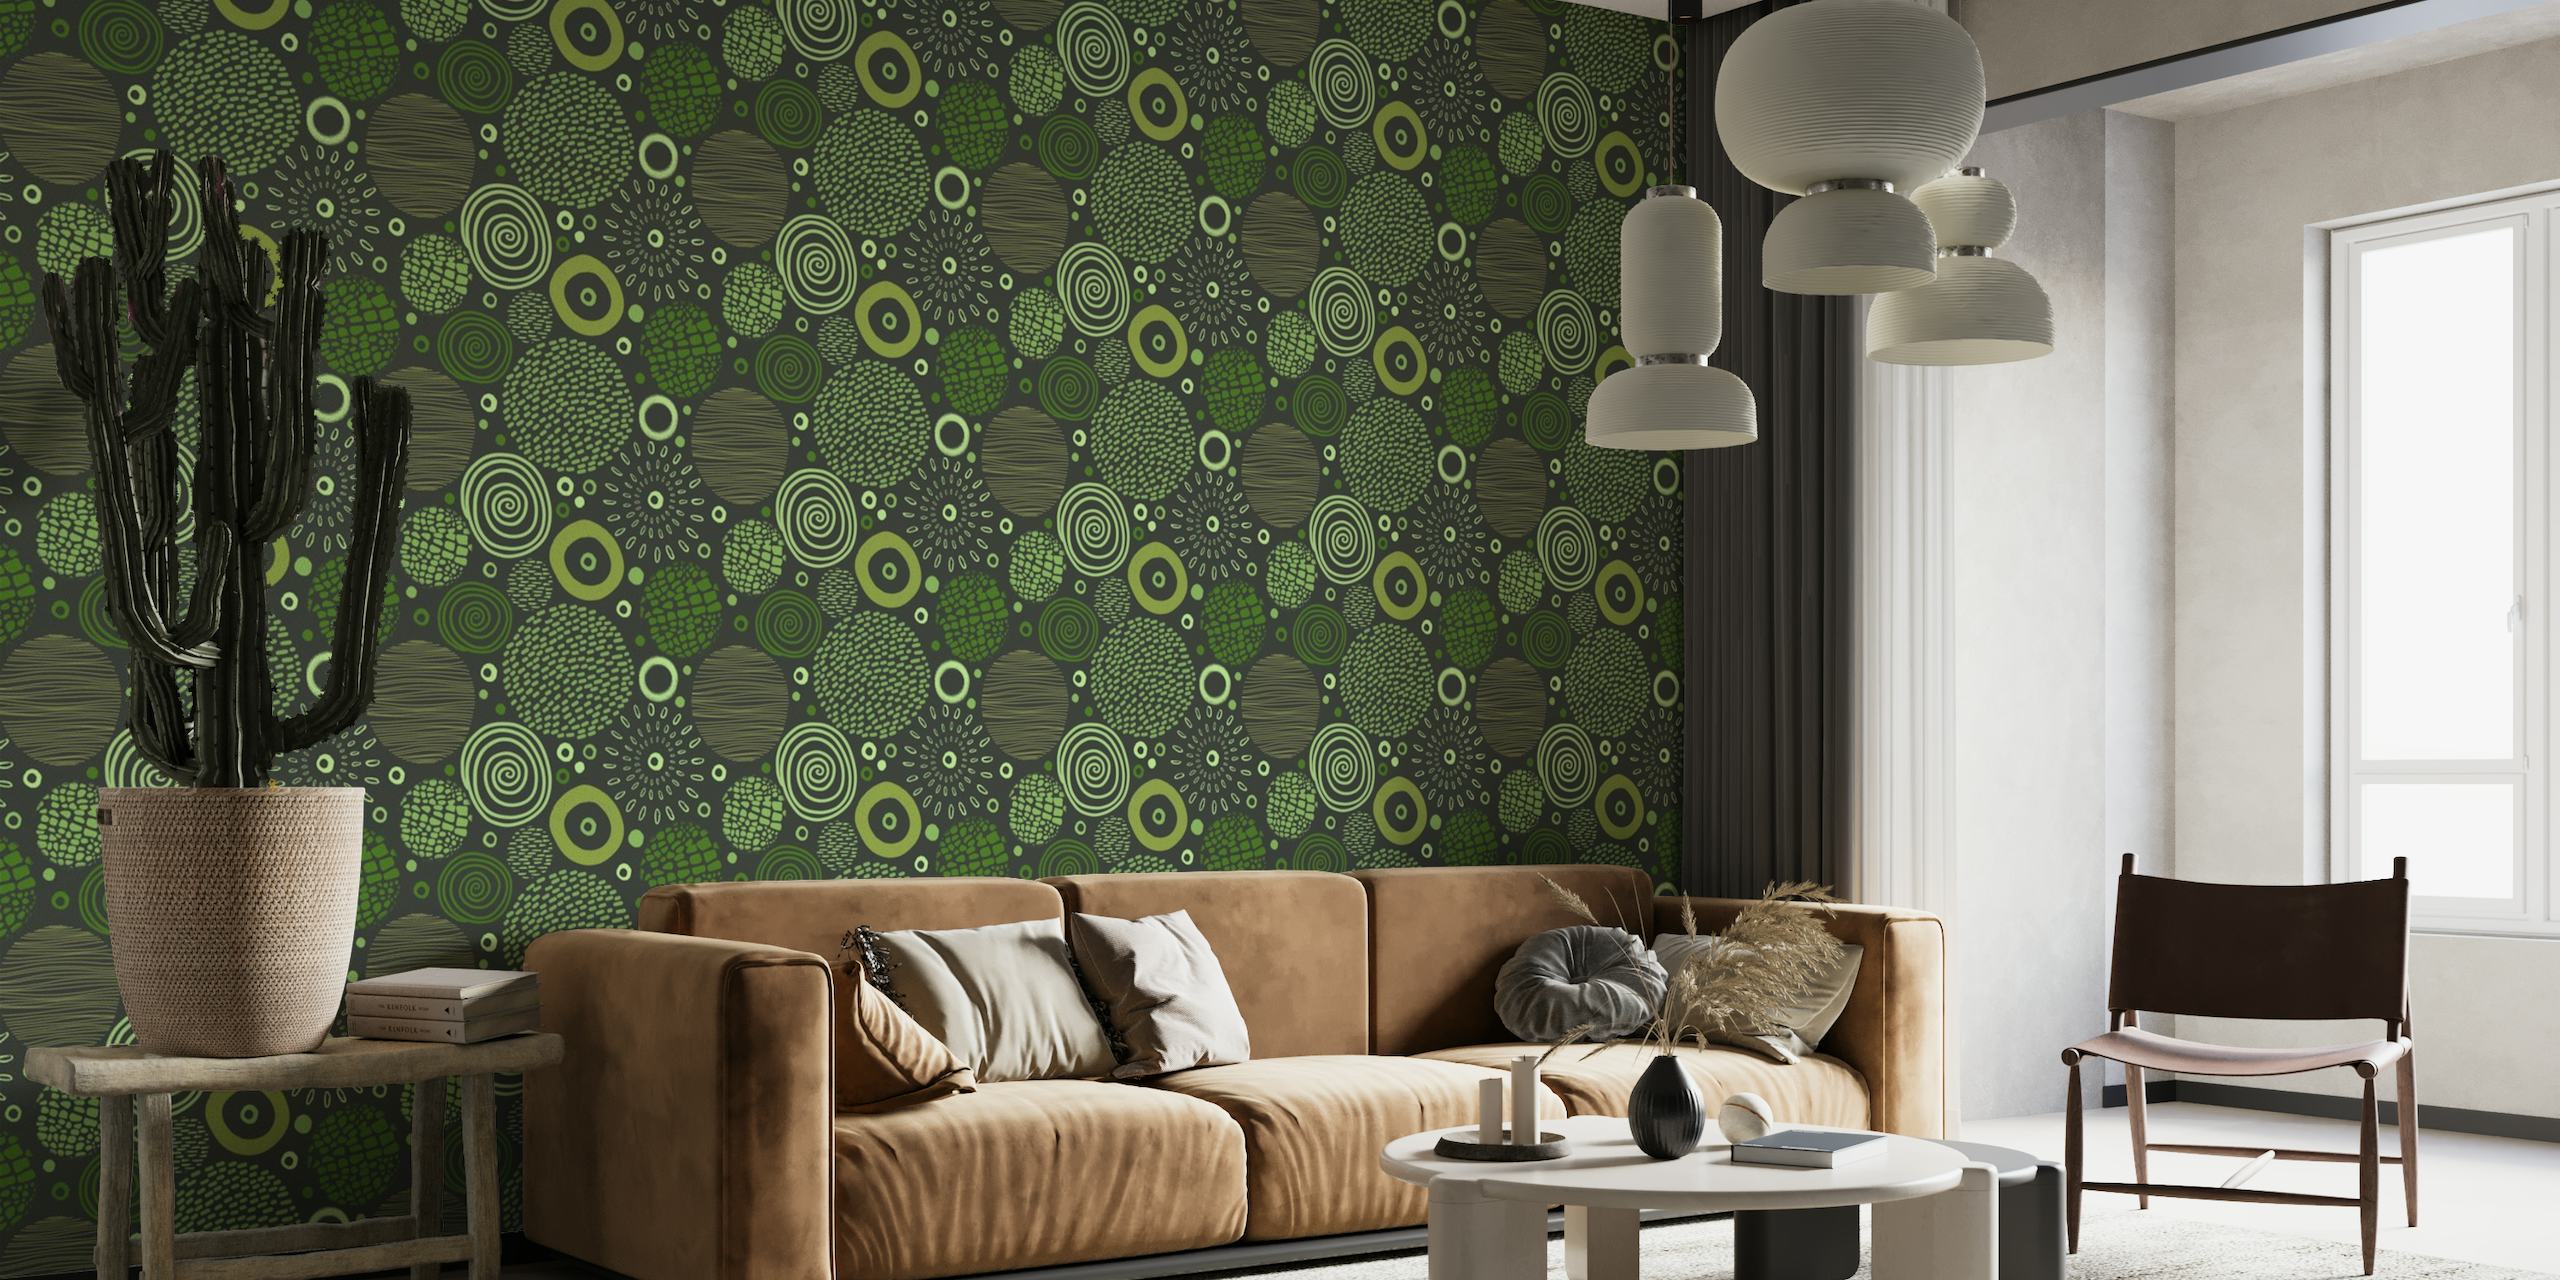 Circle Marks Tribal Pattern In Green Tones tapete